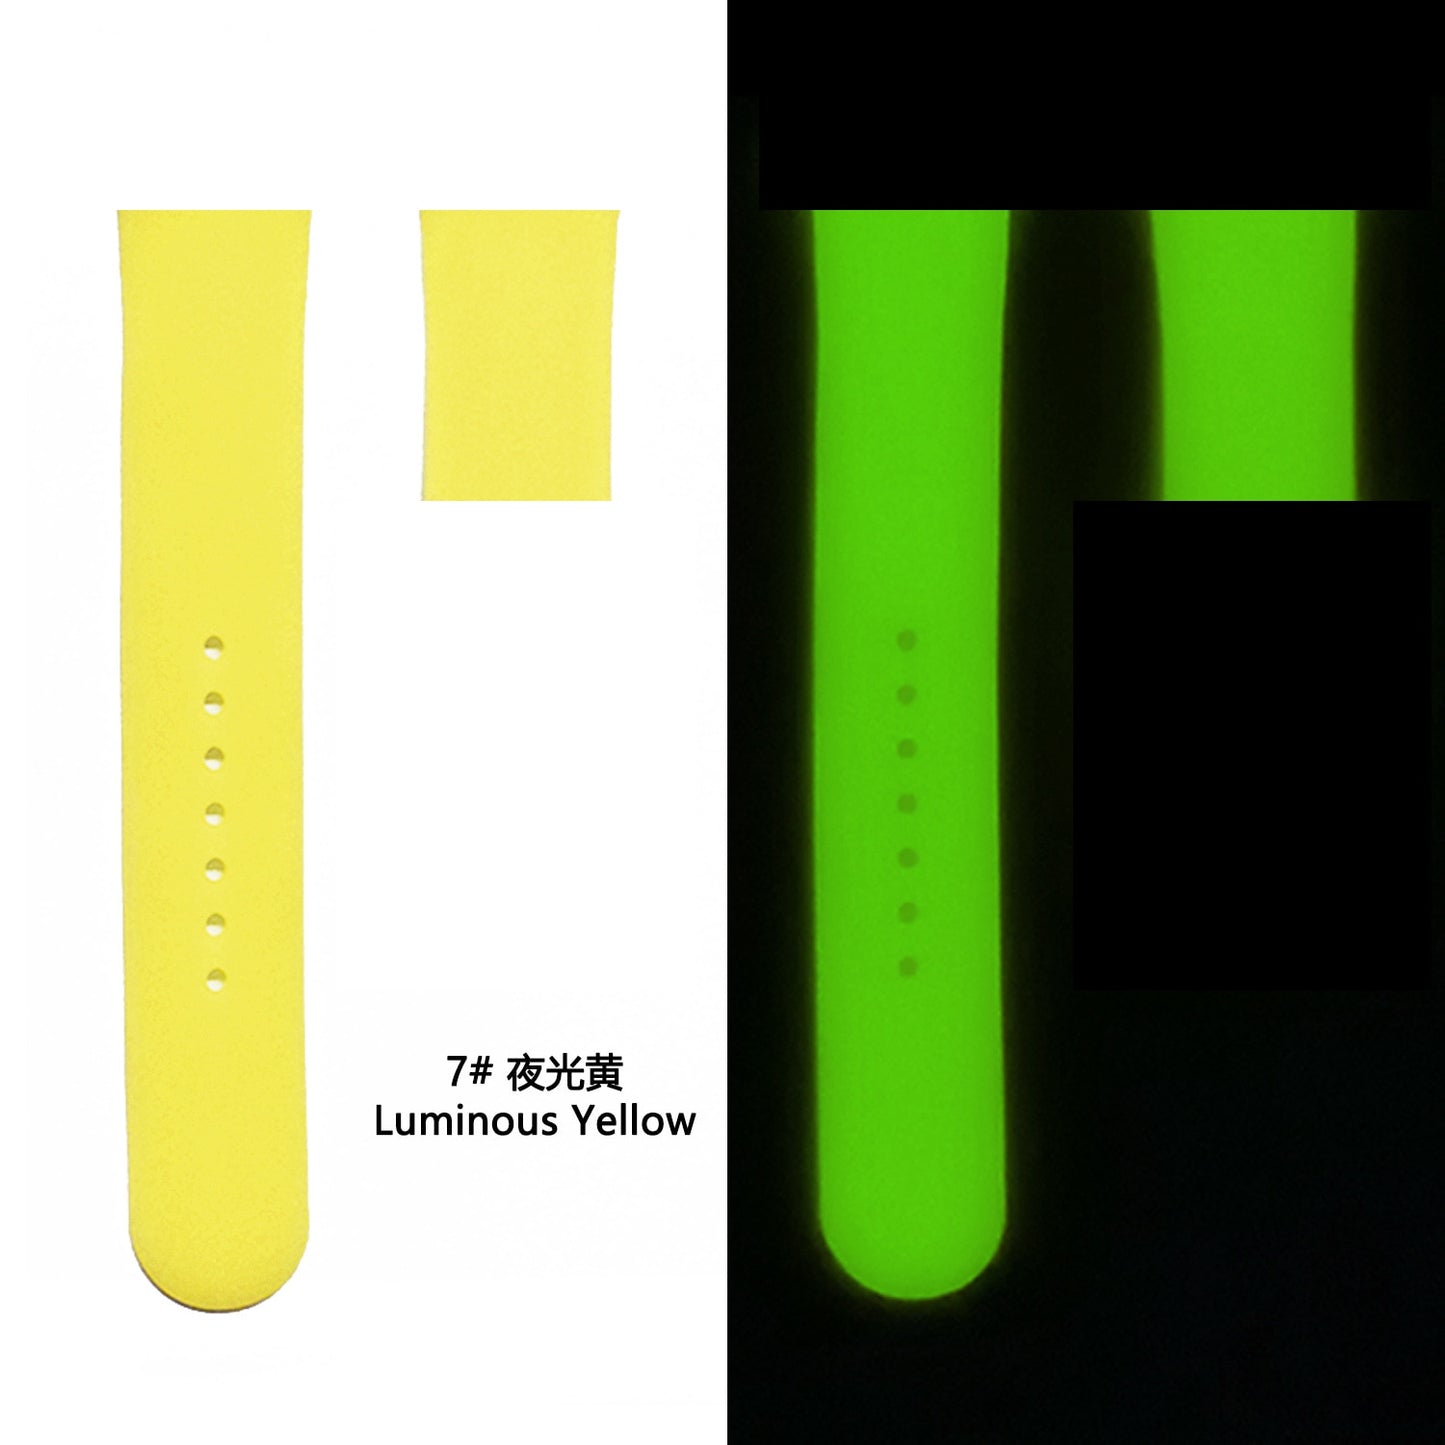 Luminous Silicone Strap For Apple Watch Band Ultra 49mm 8 7 45/41mm Sport Loop Bracelet For Iwatch 6 5 4 Se 44mm 42mm 40mm 38mm - China / luminous yellow / 38 40 41mm  SM - United States / luminous yellow / 38 40 41mm  SM - China / luminous yellow / 38 40 41mm  ML - United States / luminous yellow / 38 40 41mm  ML - China / luminous yellow / 42 44 45 49mm  SM - United States / luminous yellow / 42 44 45 49mm  SM - China / luminous yellow / 42 44 45 49mm  ML - United States / luminous yellow /...